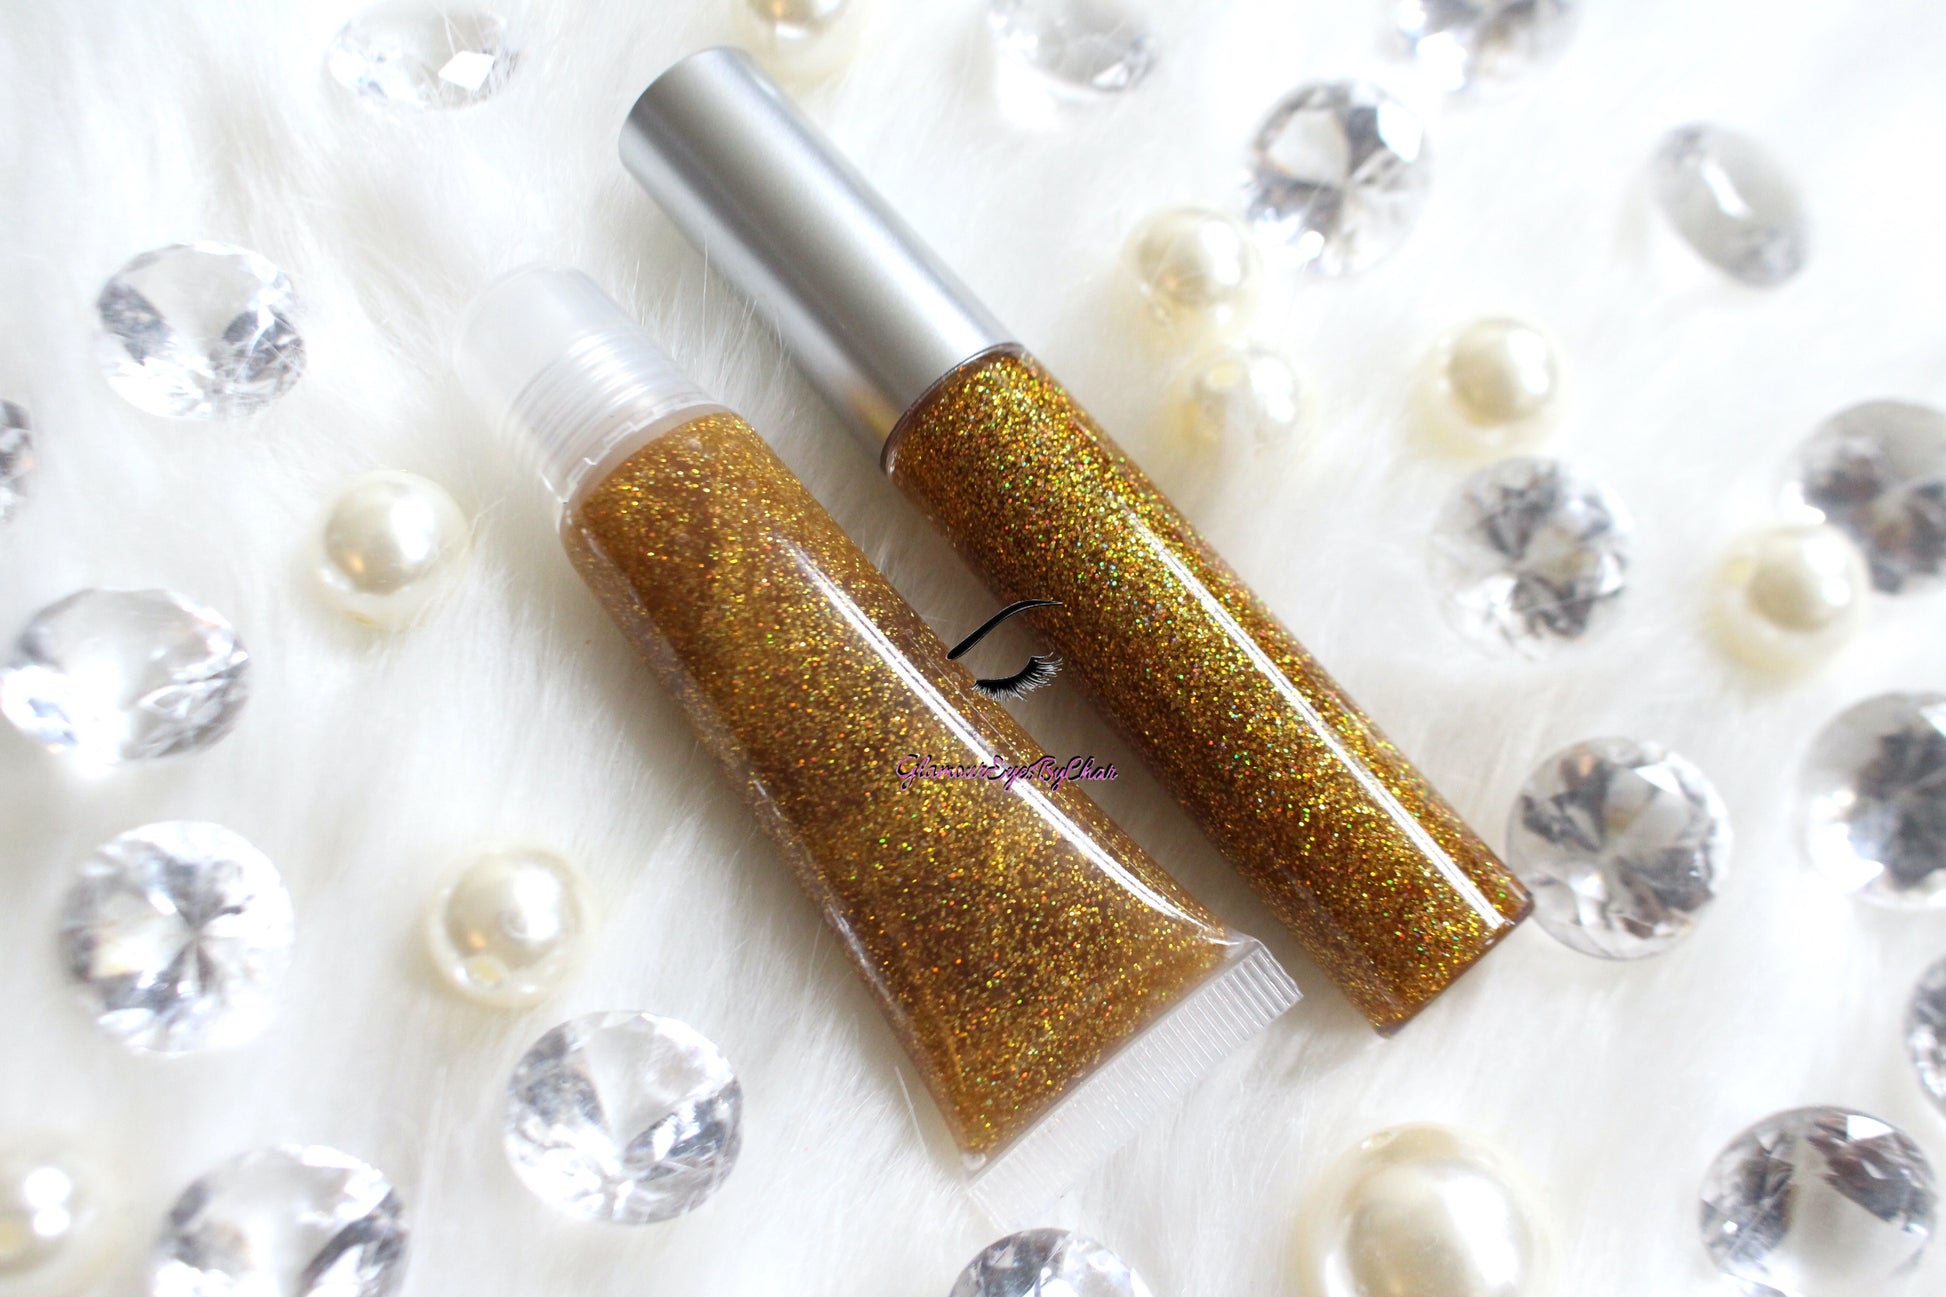 I Said Yes is a clear hydrating gloss with extra fine gold holographic glitter. This gloss is also vegan, gluten-free, high shine, smooth and long lasting. It's made with premium rich ingredients to keep your lips soft, moisturized and luscious without feeling sticky. I Said Yes is available in a squeeze tube and a wand tube (doe foot applicator) for a more precise application.